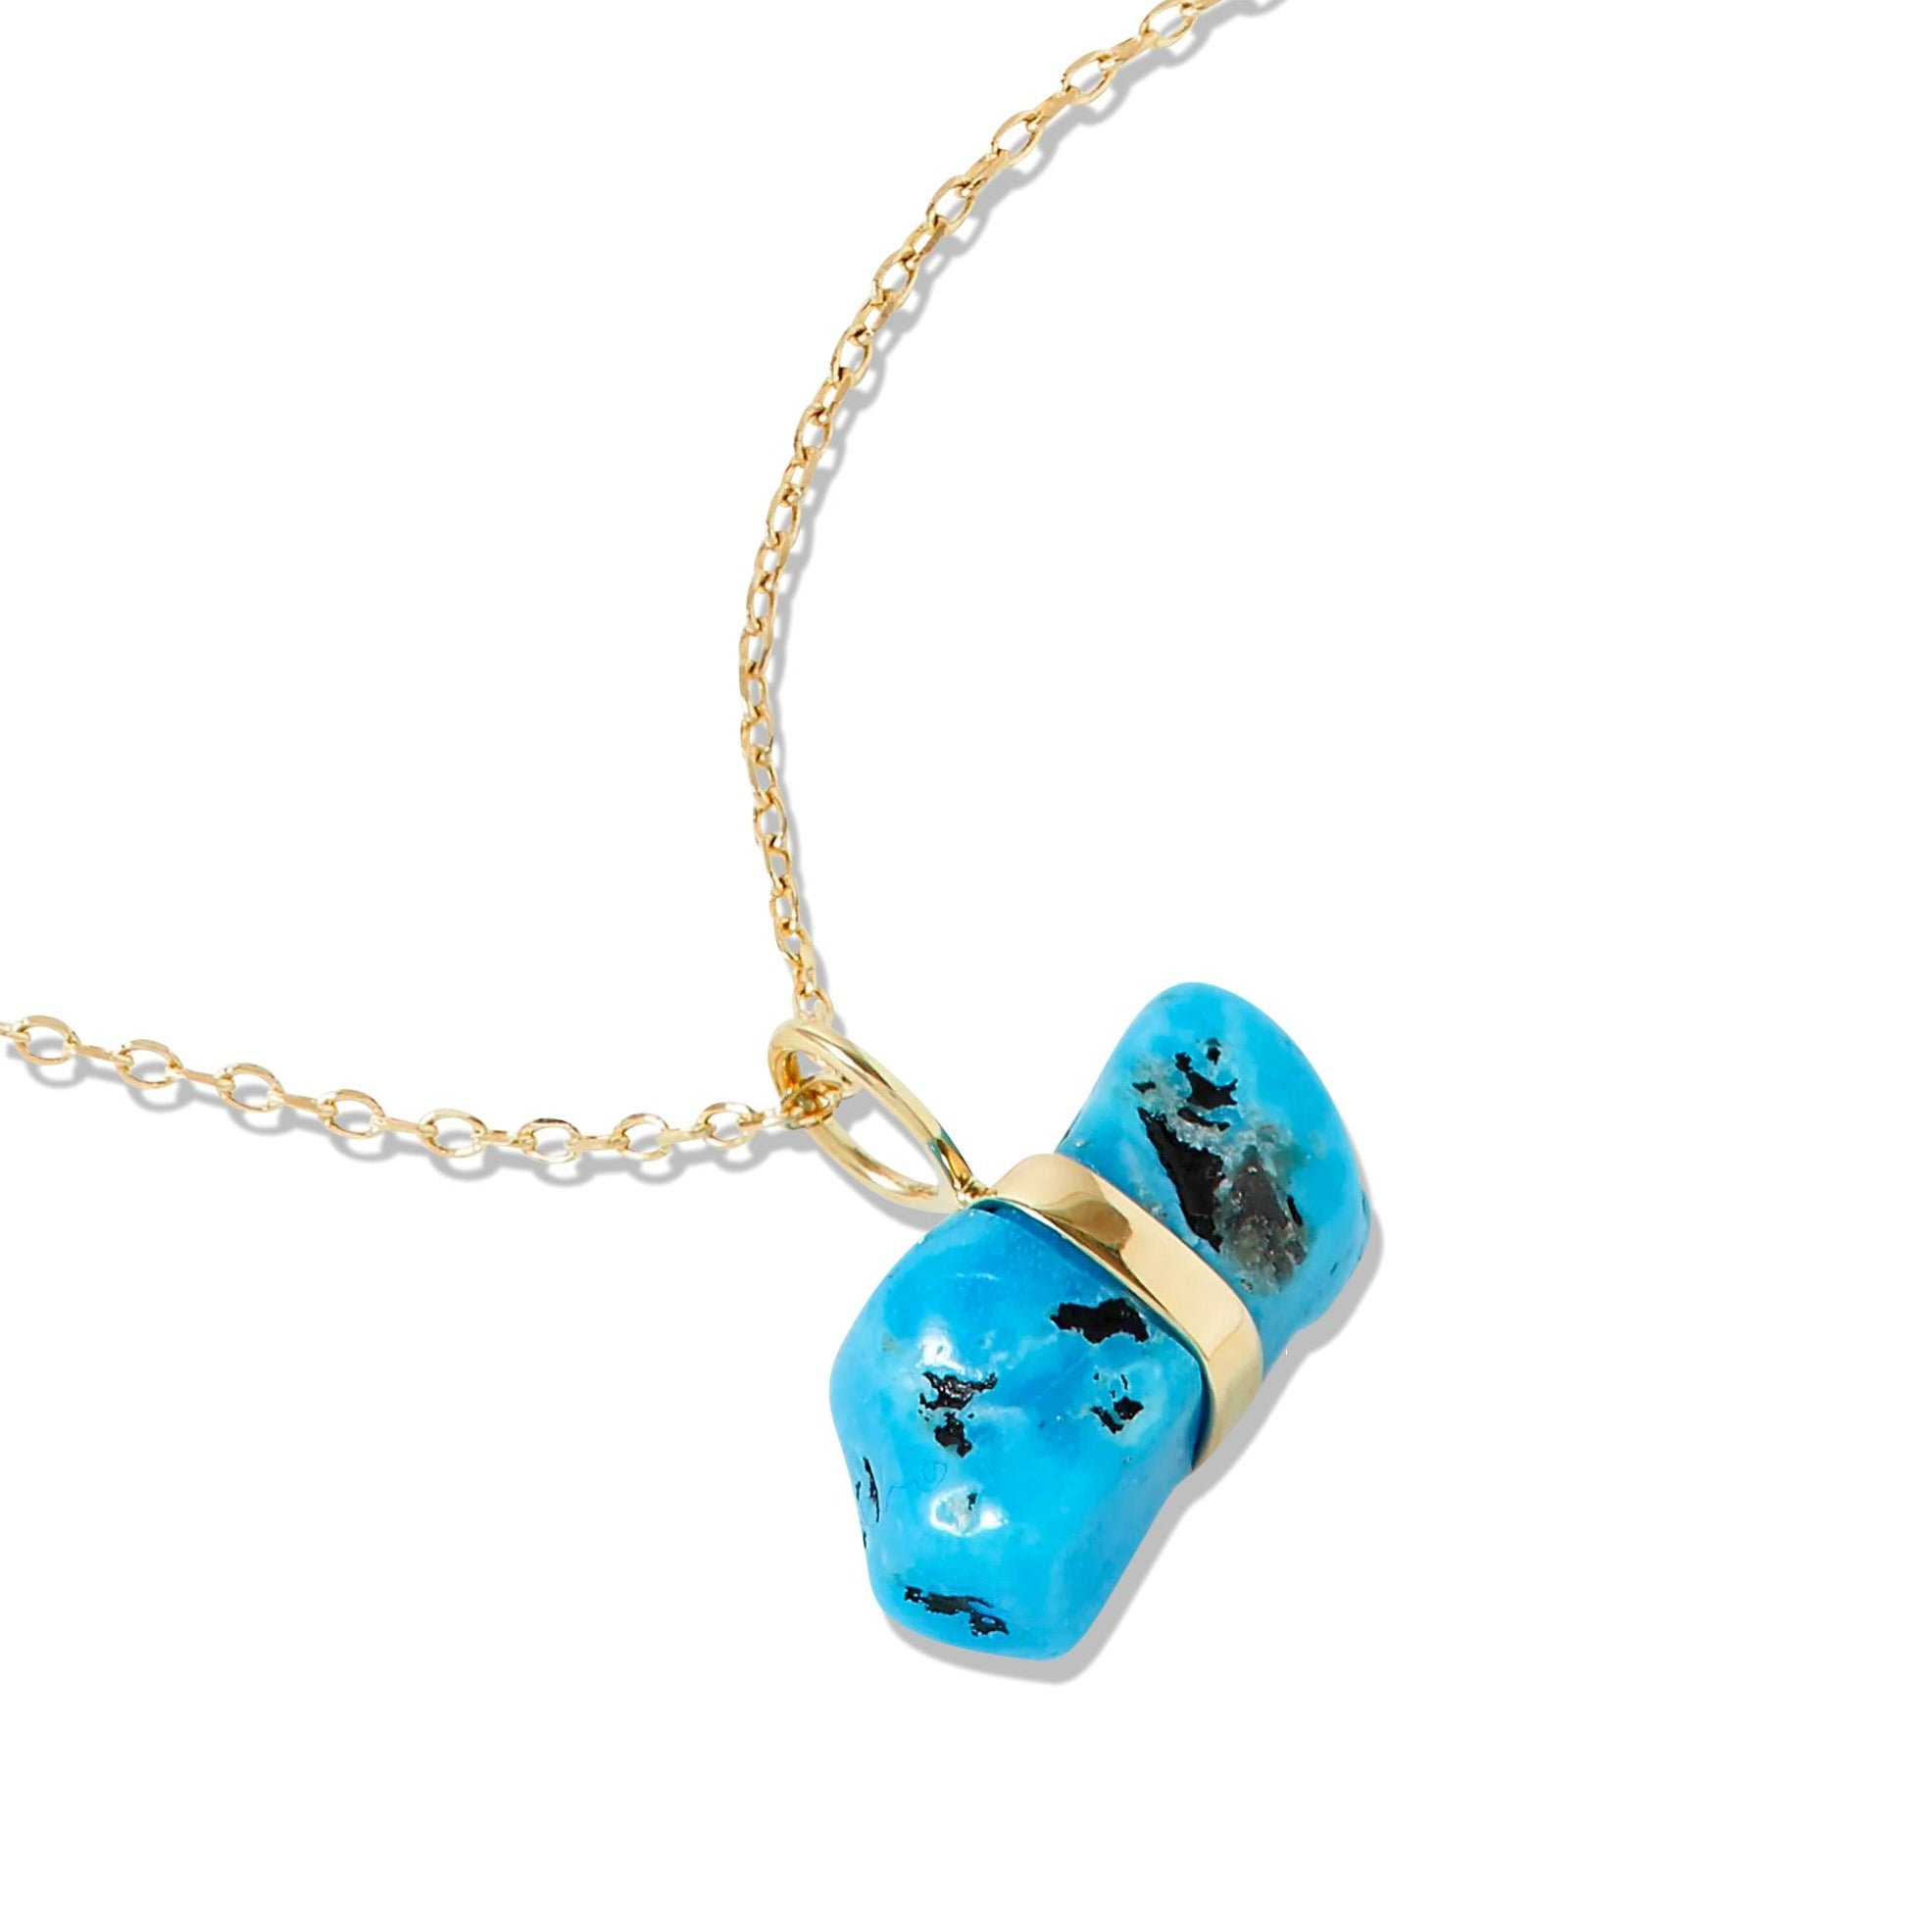 Turquoise Pendant Necklace for Women in 14k Yellow Gold Plated on 925  Sterling Silver - December Birthstone